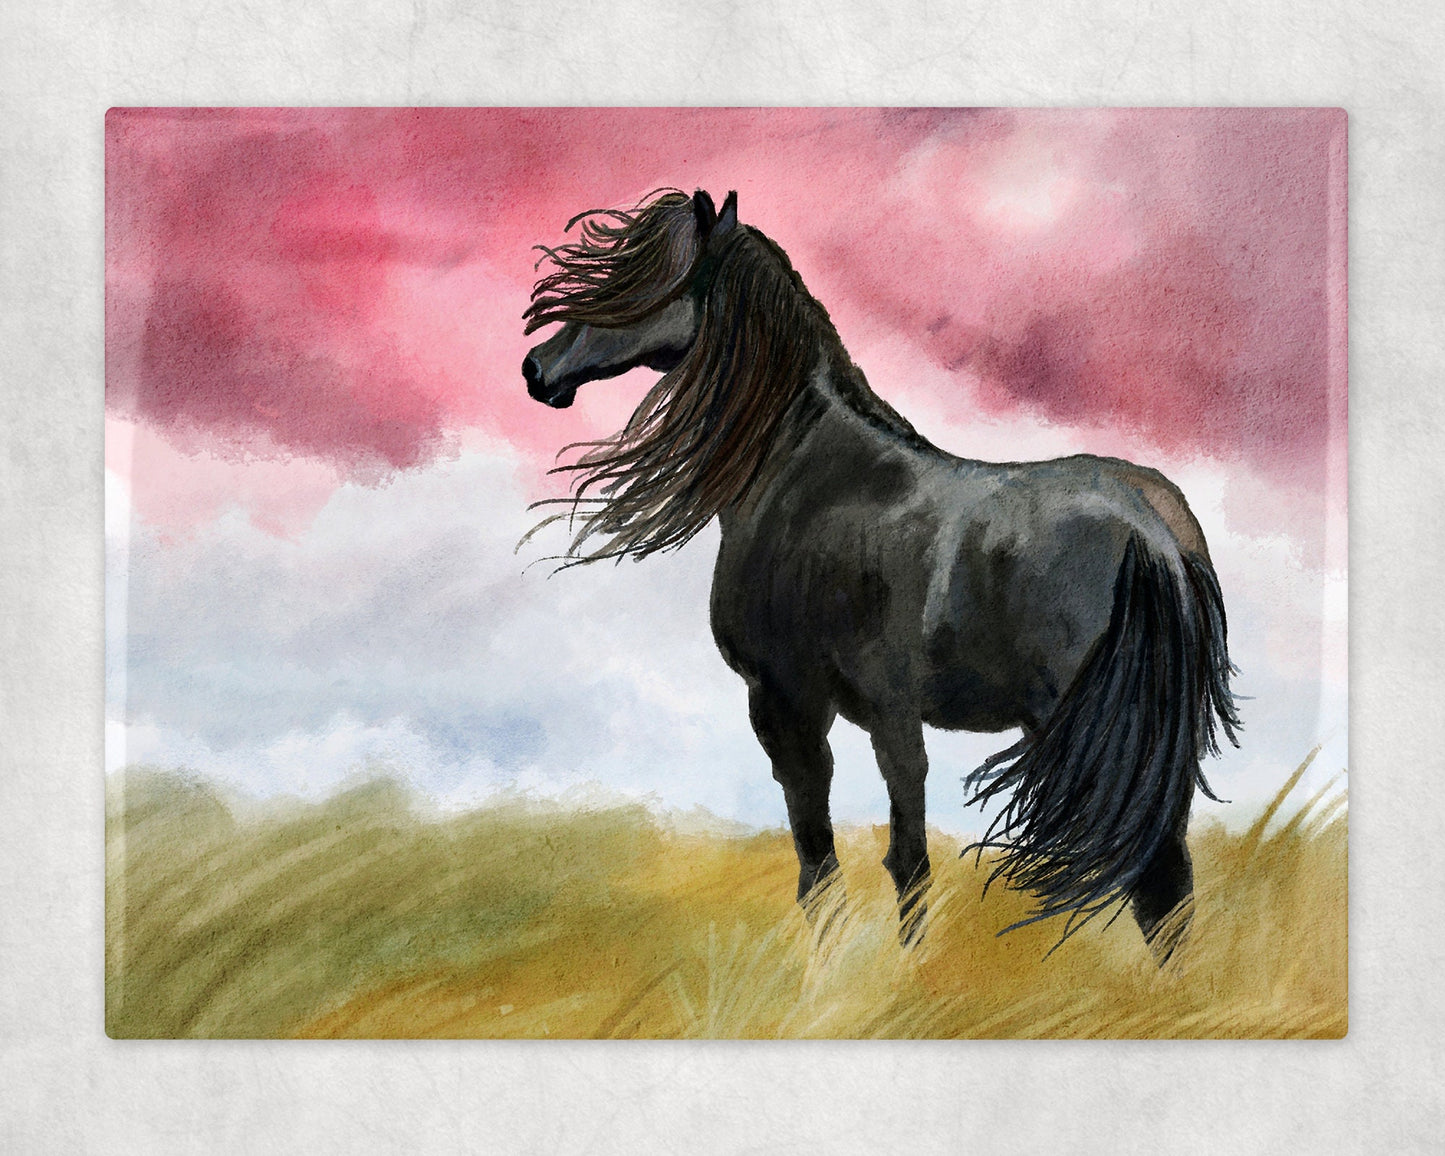 Black Horse Art Decorative Ceramic Tile with Optional Easel Back - 6x8 inches